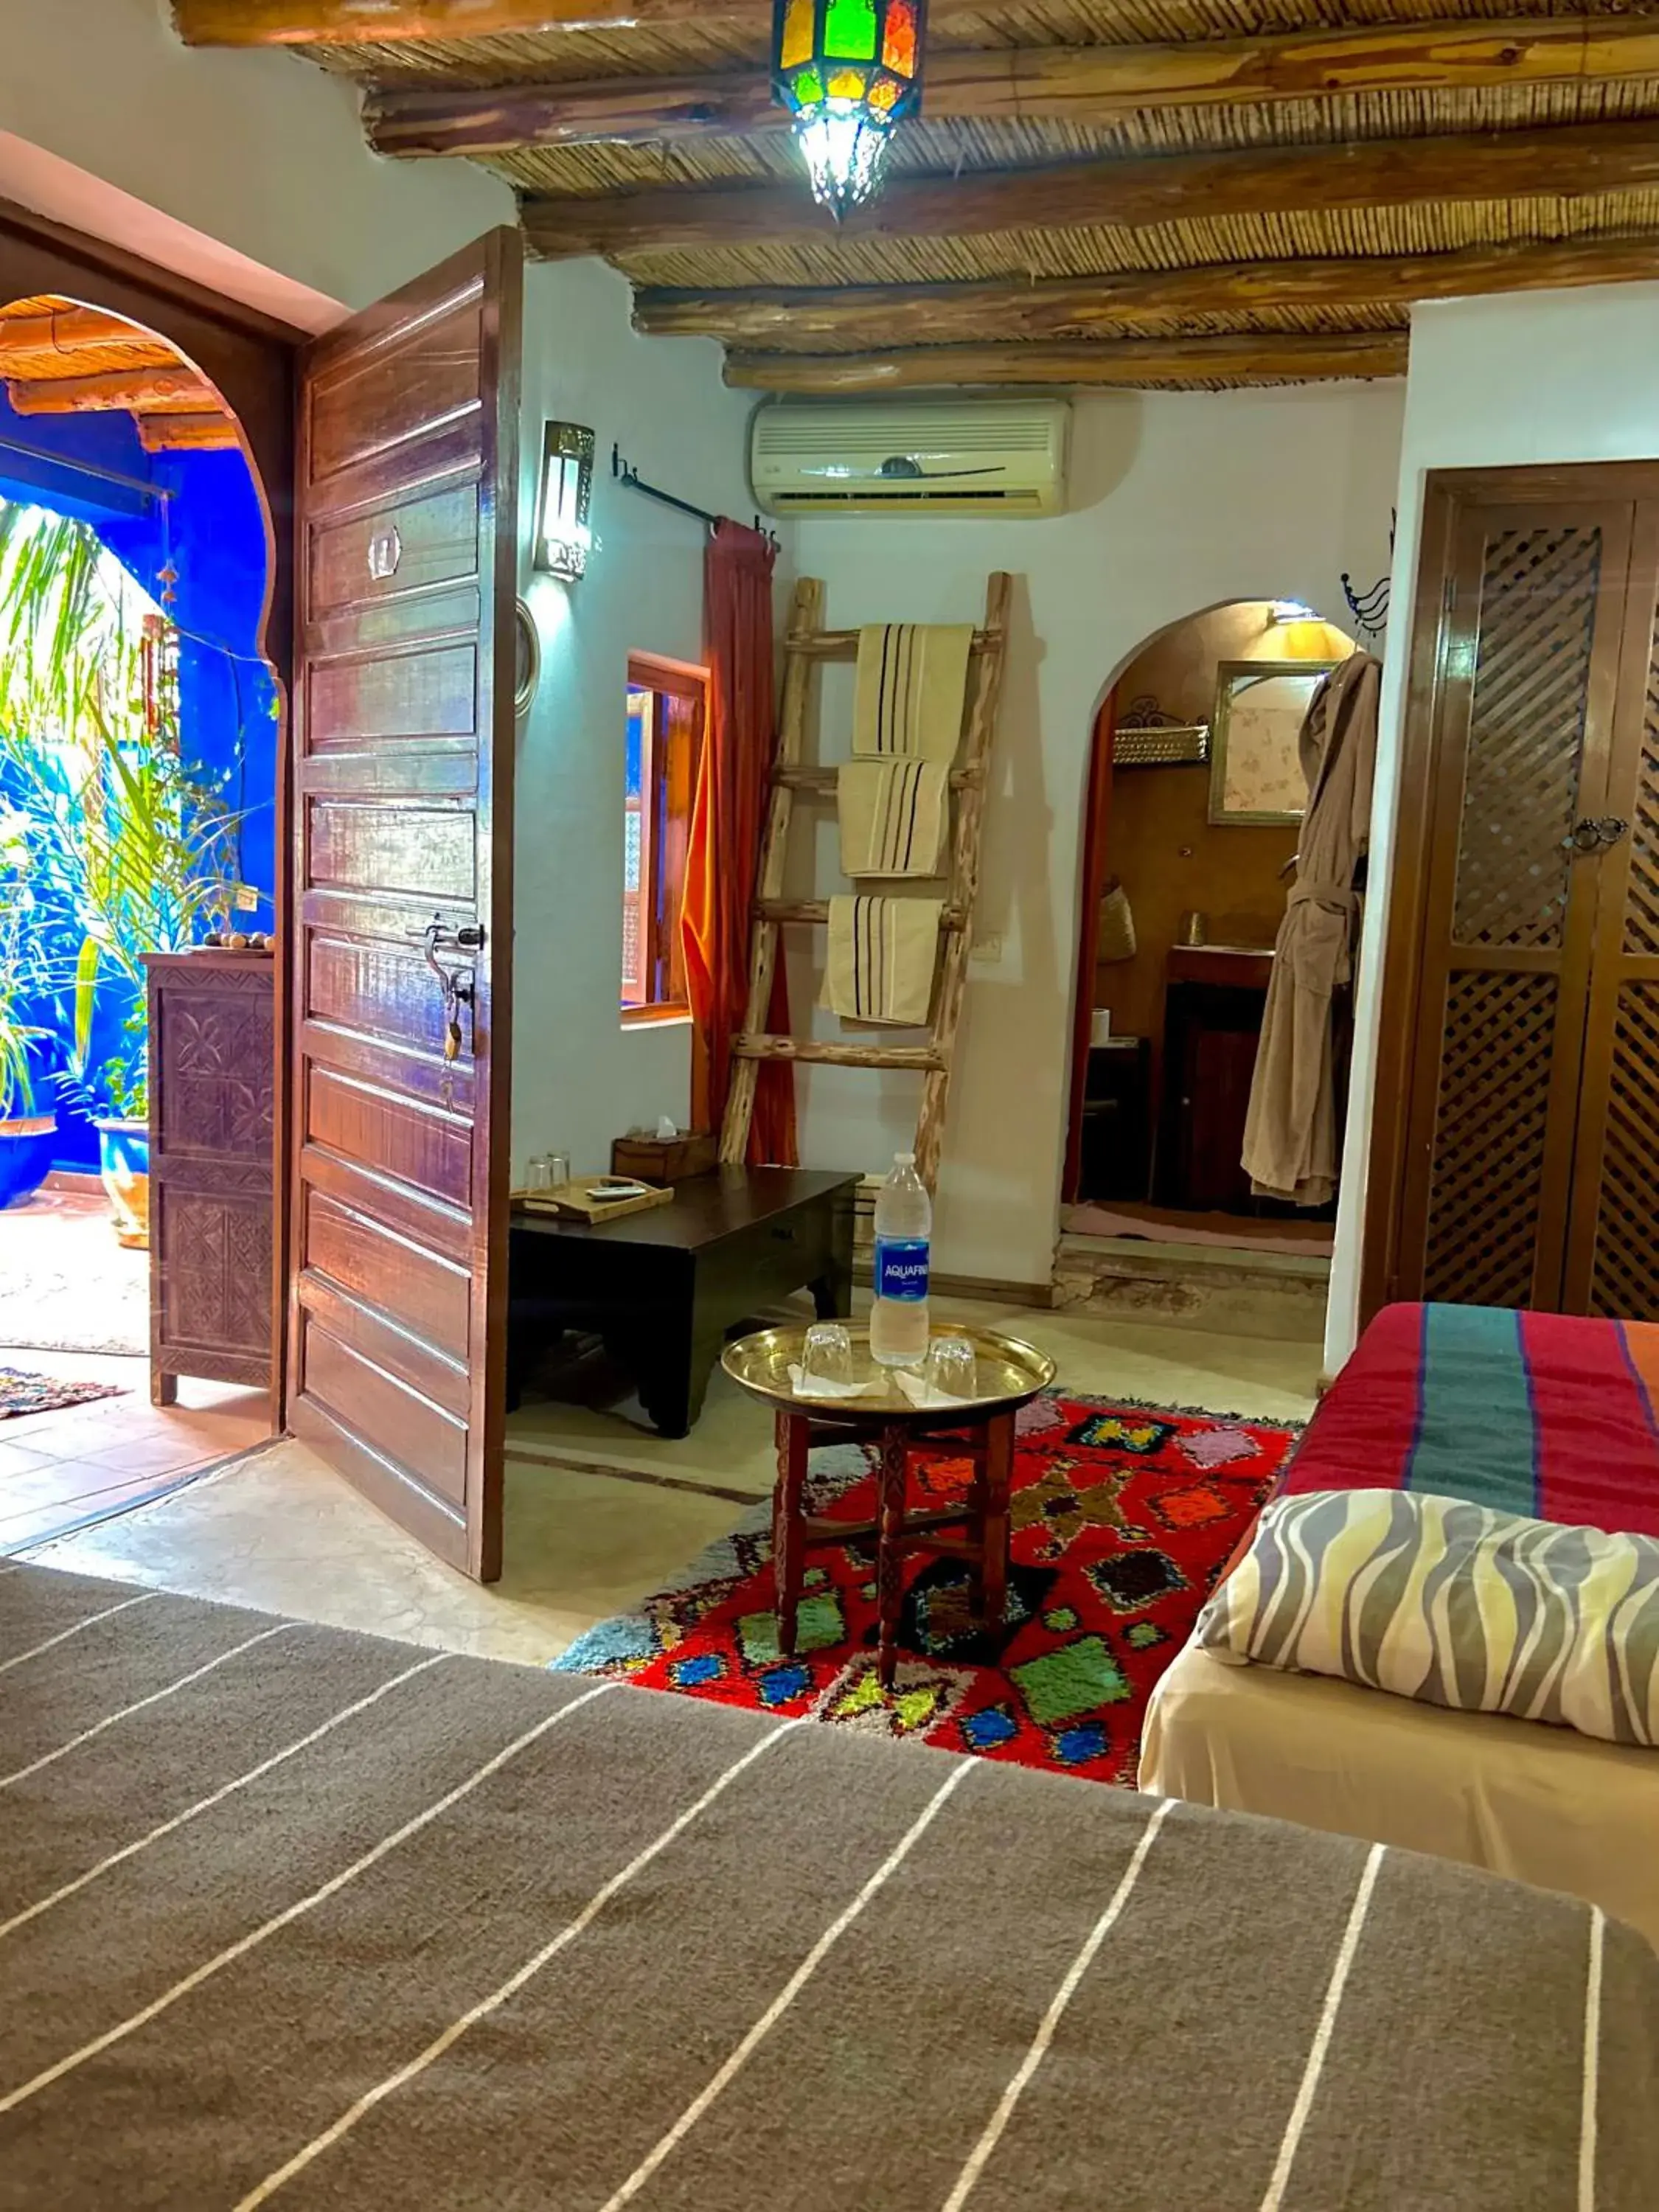 Bedroom in Riad Alamine